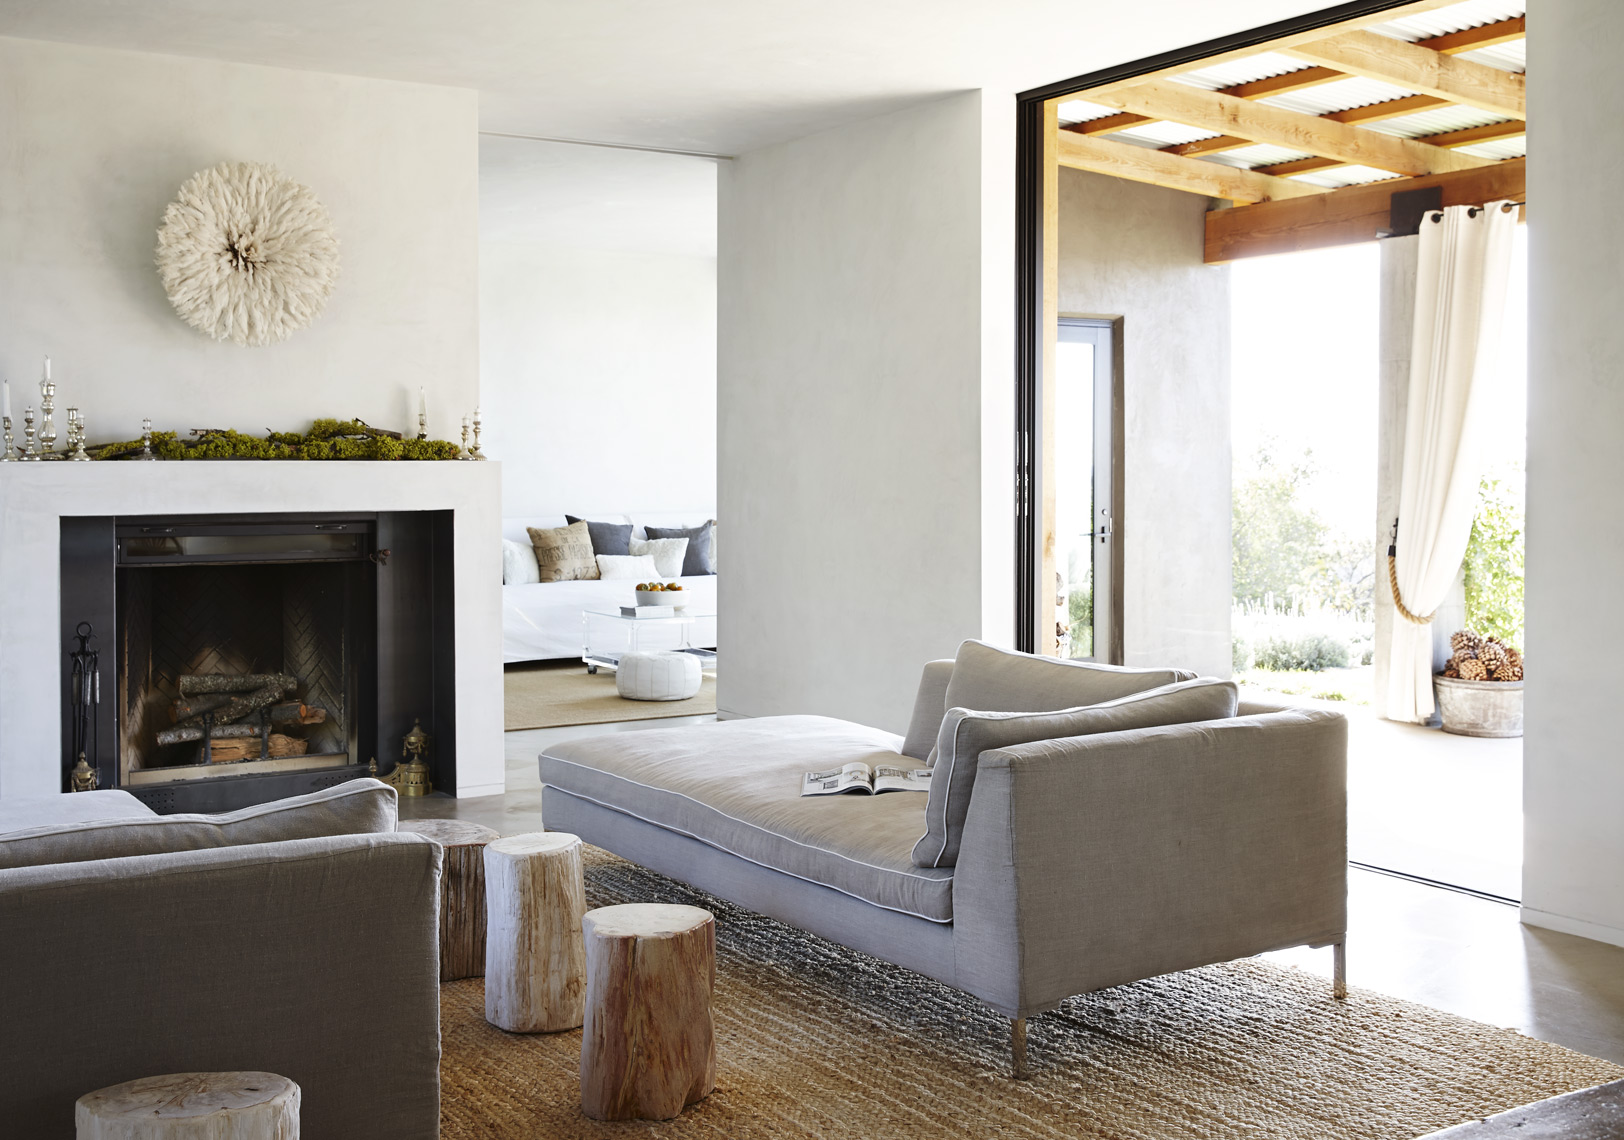 Modern living room with fireplace view outside chaise lounger petrified wood Sean Dagen Photography